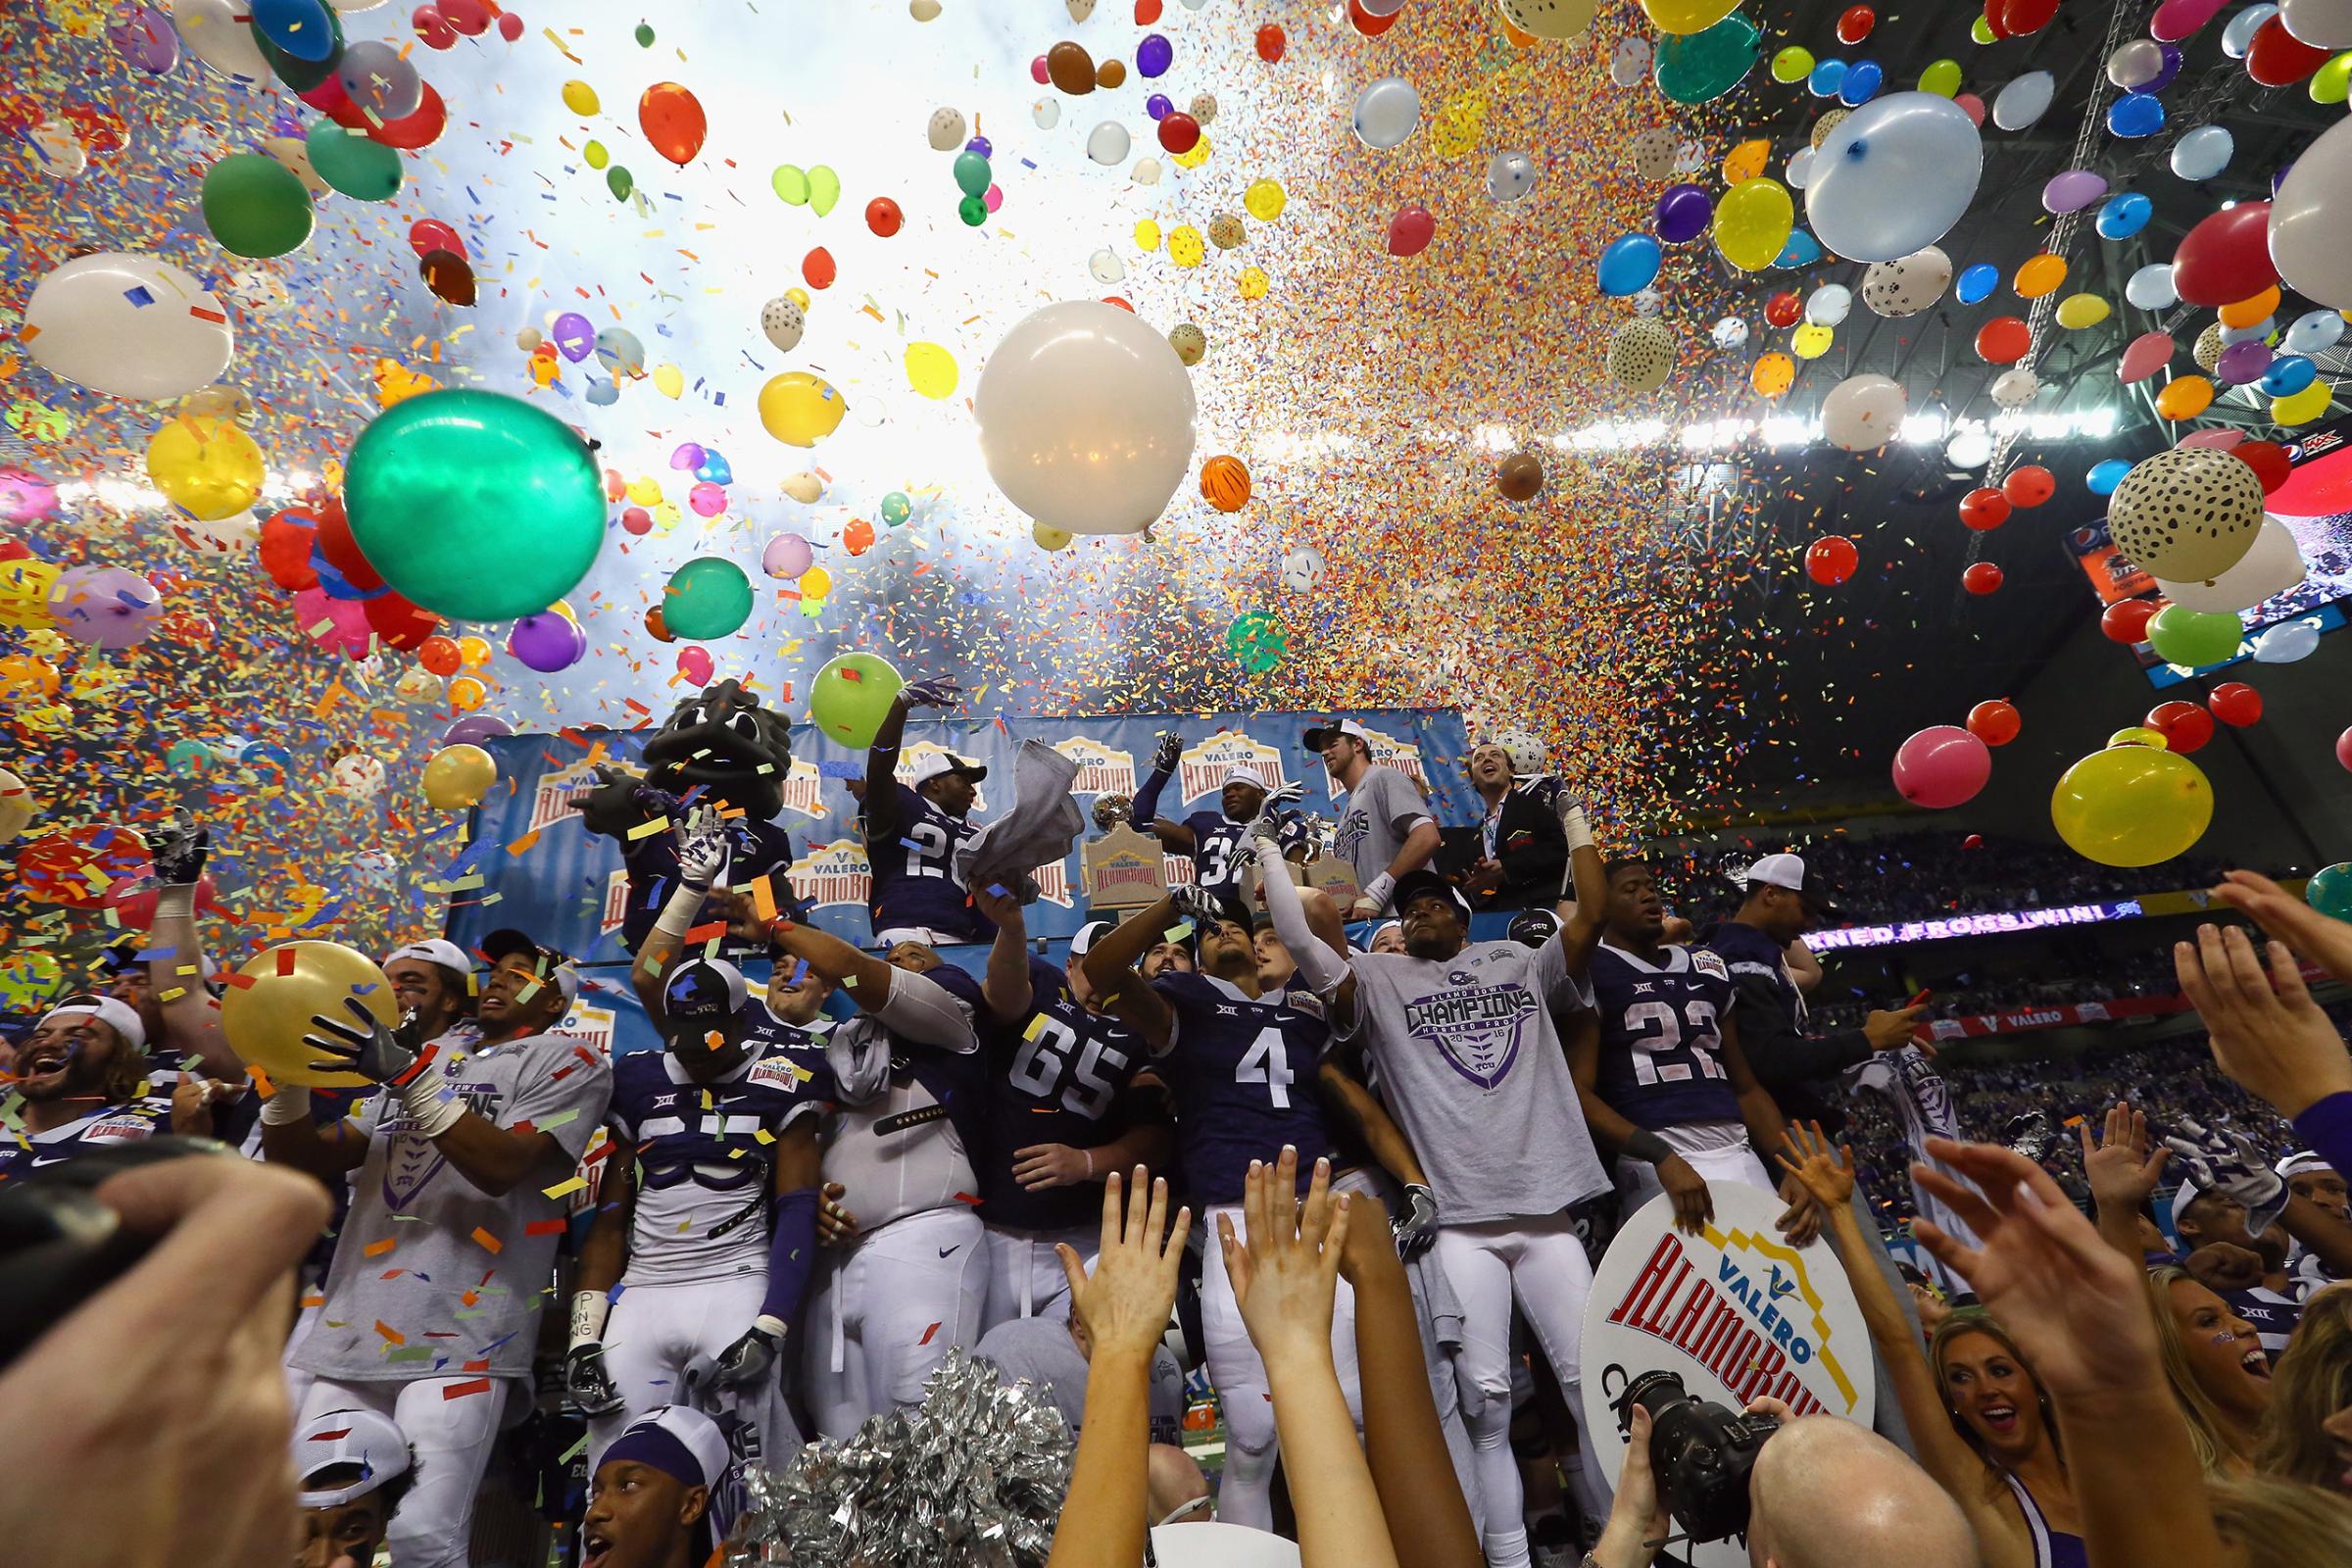 The TCU Horned Frogs celebrate after winning the Valero Alamo Bowl in three overtimes against the Oregon Ducks at Alamodome on Jan. 2, 2016 in San Antonio.